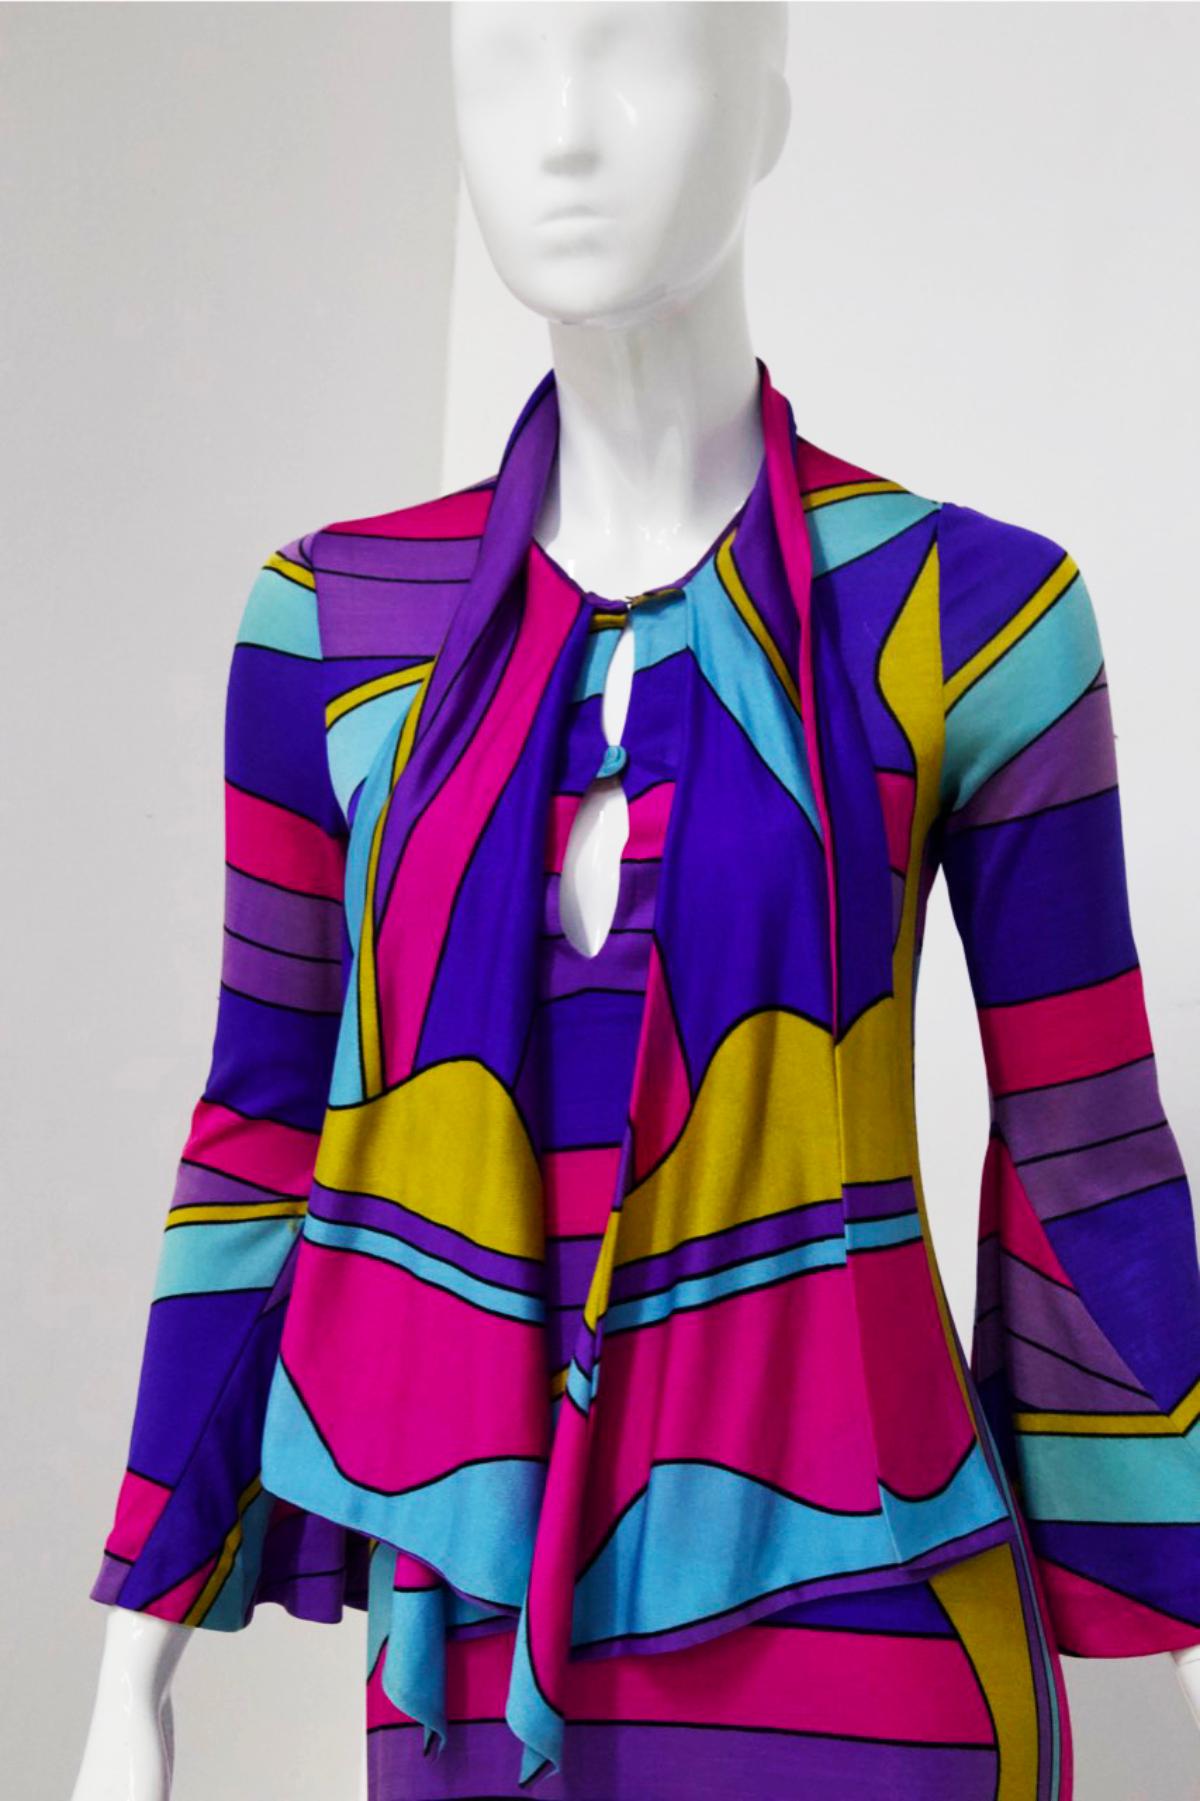 This exceptional Louis Féraud maxi dress from the late 1960s or early 1970s is made of the typical fine, lightweight synthetic fabric and features a bold psychedelic print in yellow, pink, light blue and purple on a blue background. The 